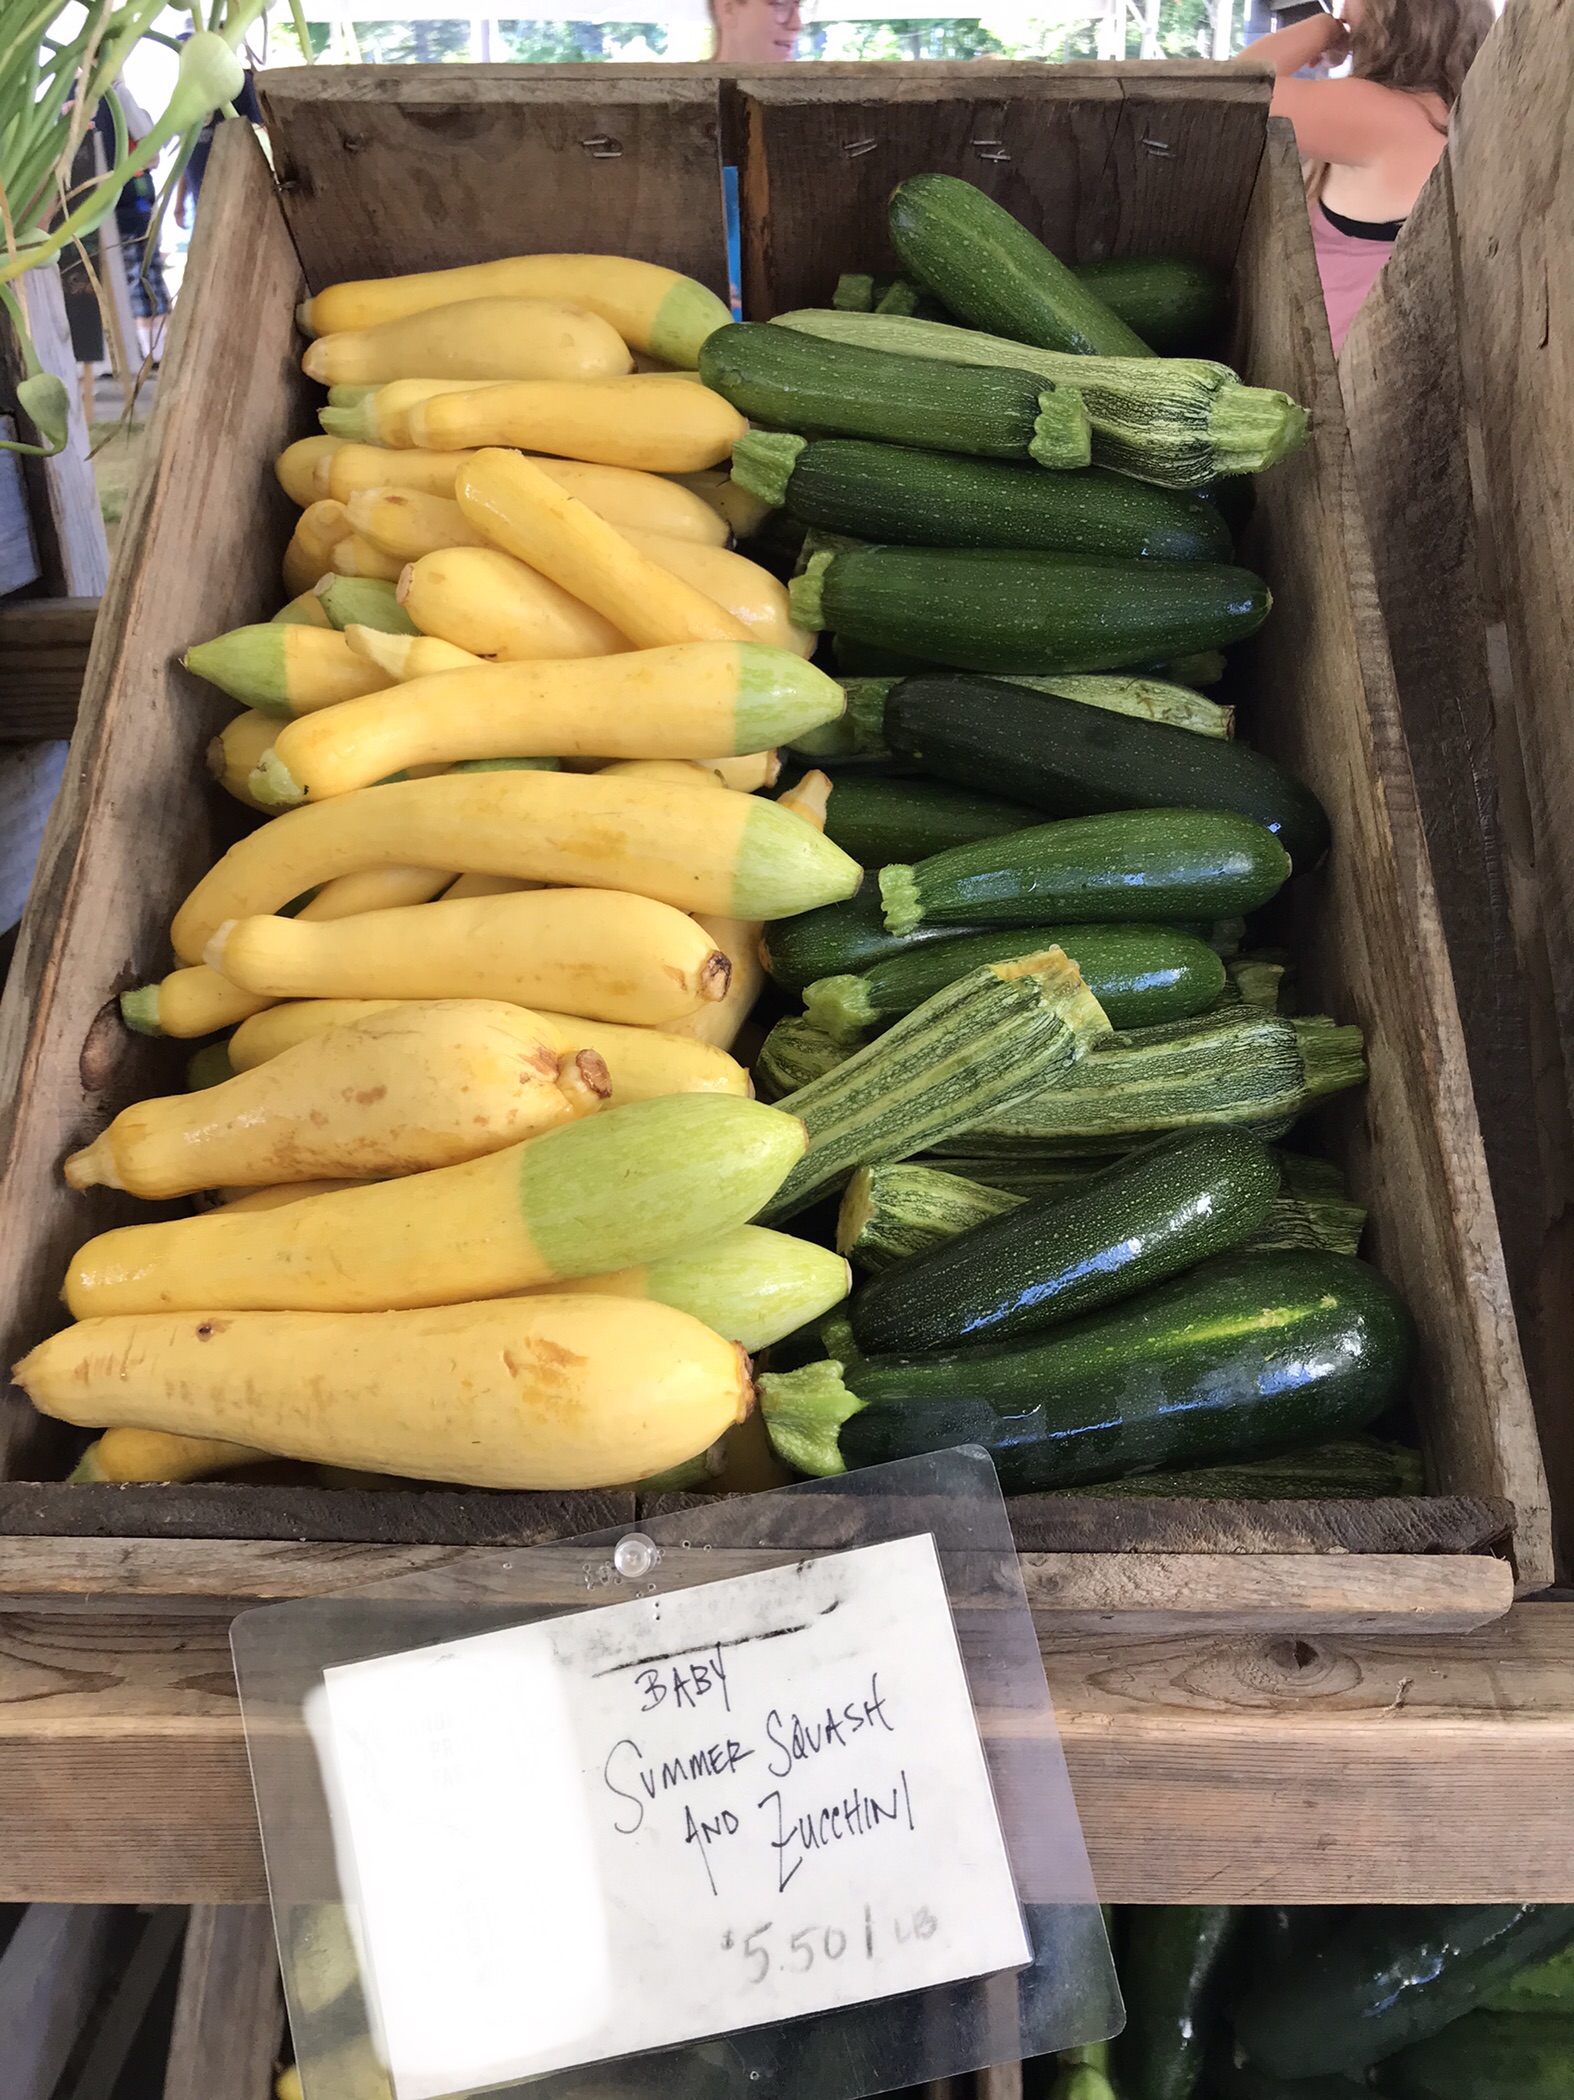 How Much Would You Pay For a Pound of Zucchini?